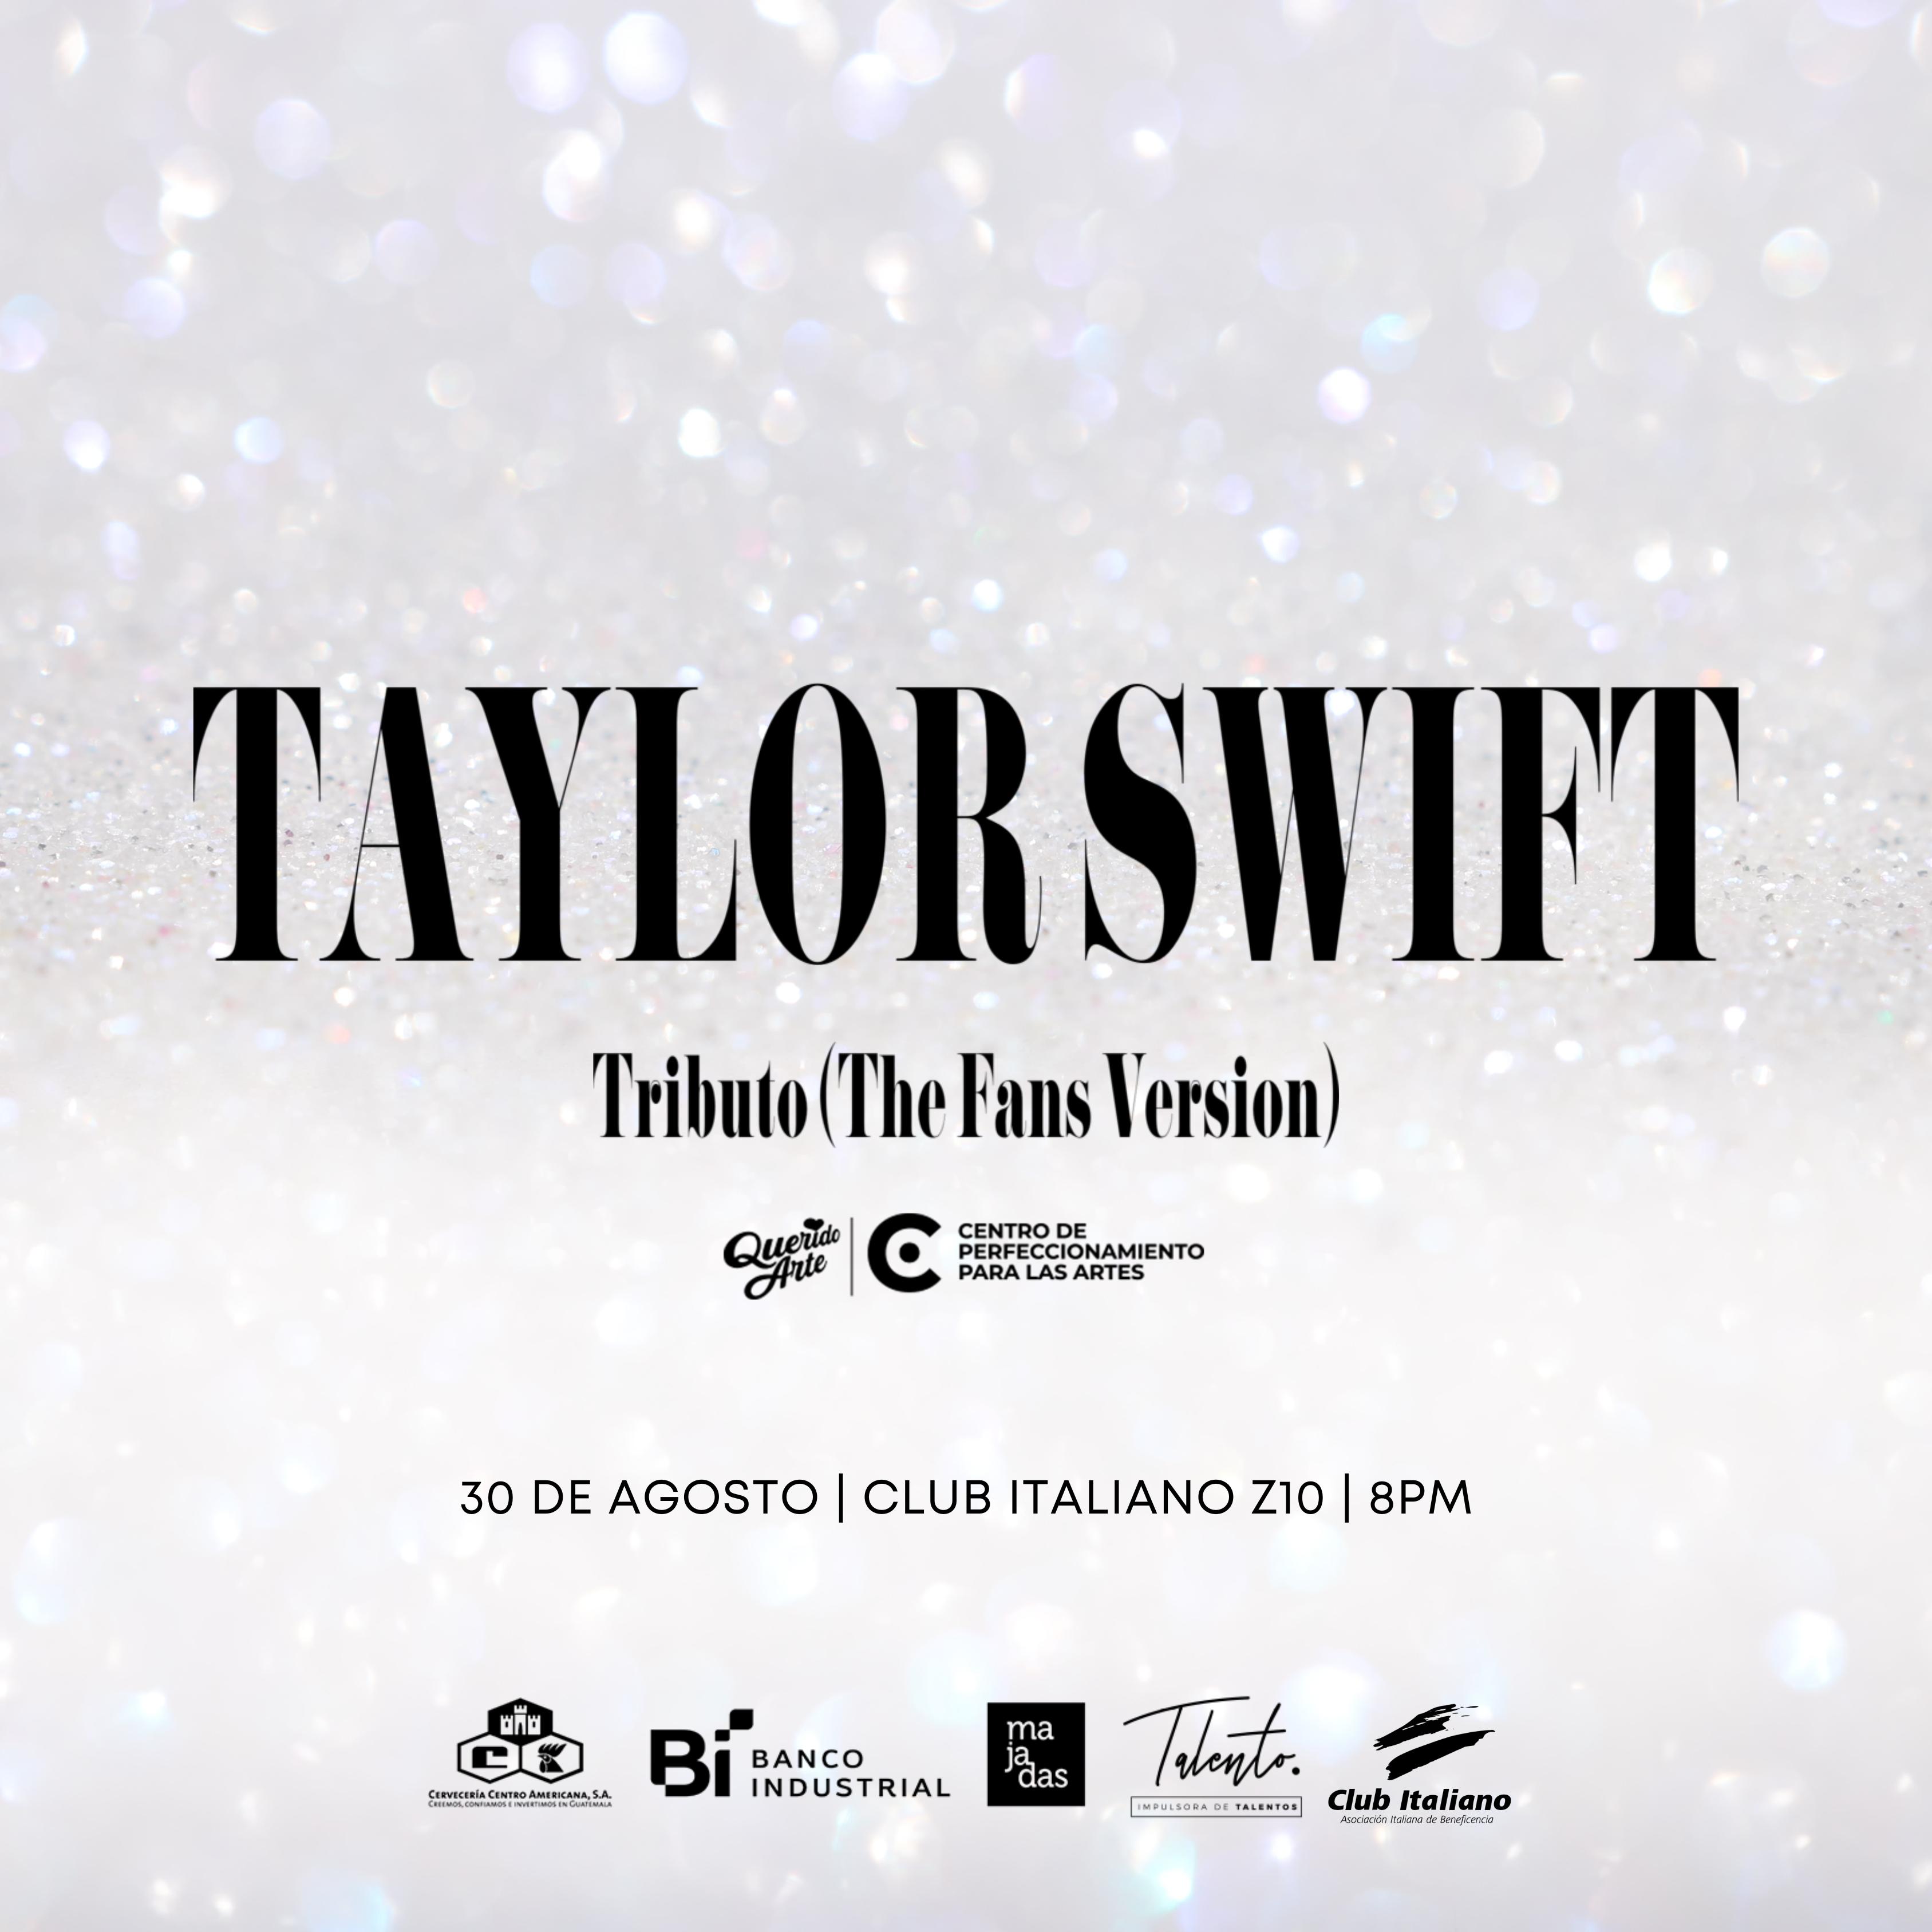 Tributo a TAYLOR SWIFT - THE FANS VERSION